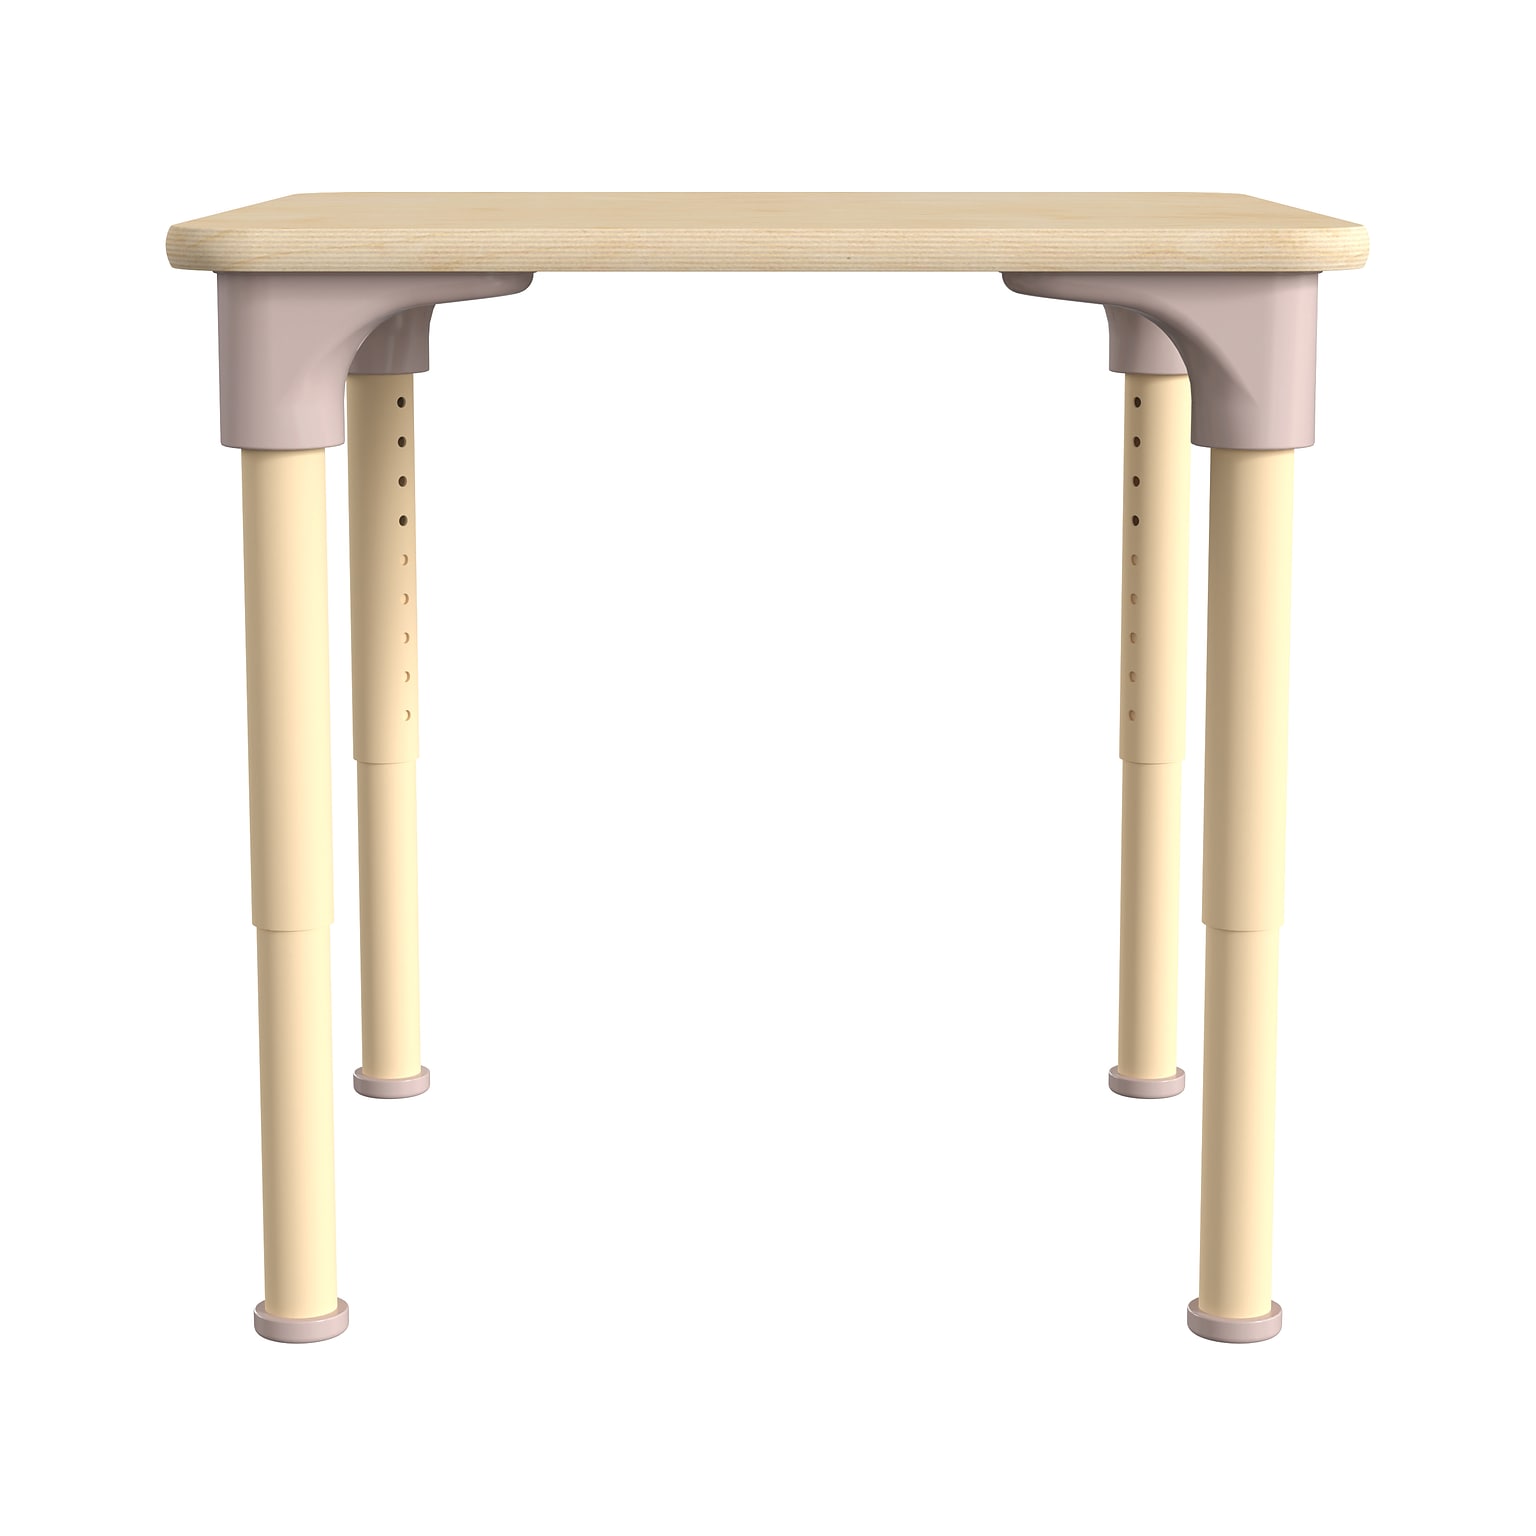 Flash Furniture Bright Beginnings Hercules Square Table, 24 x 24, Height Adjustable, Beech (MK-ME088023-GG)